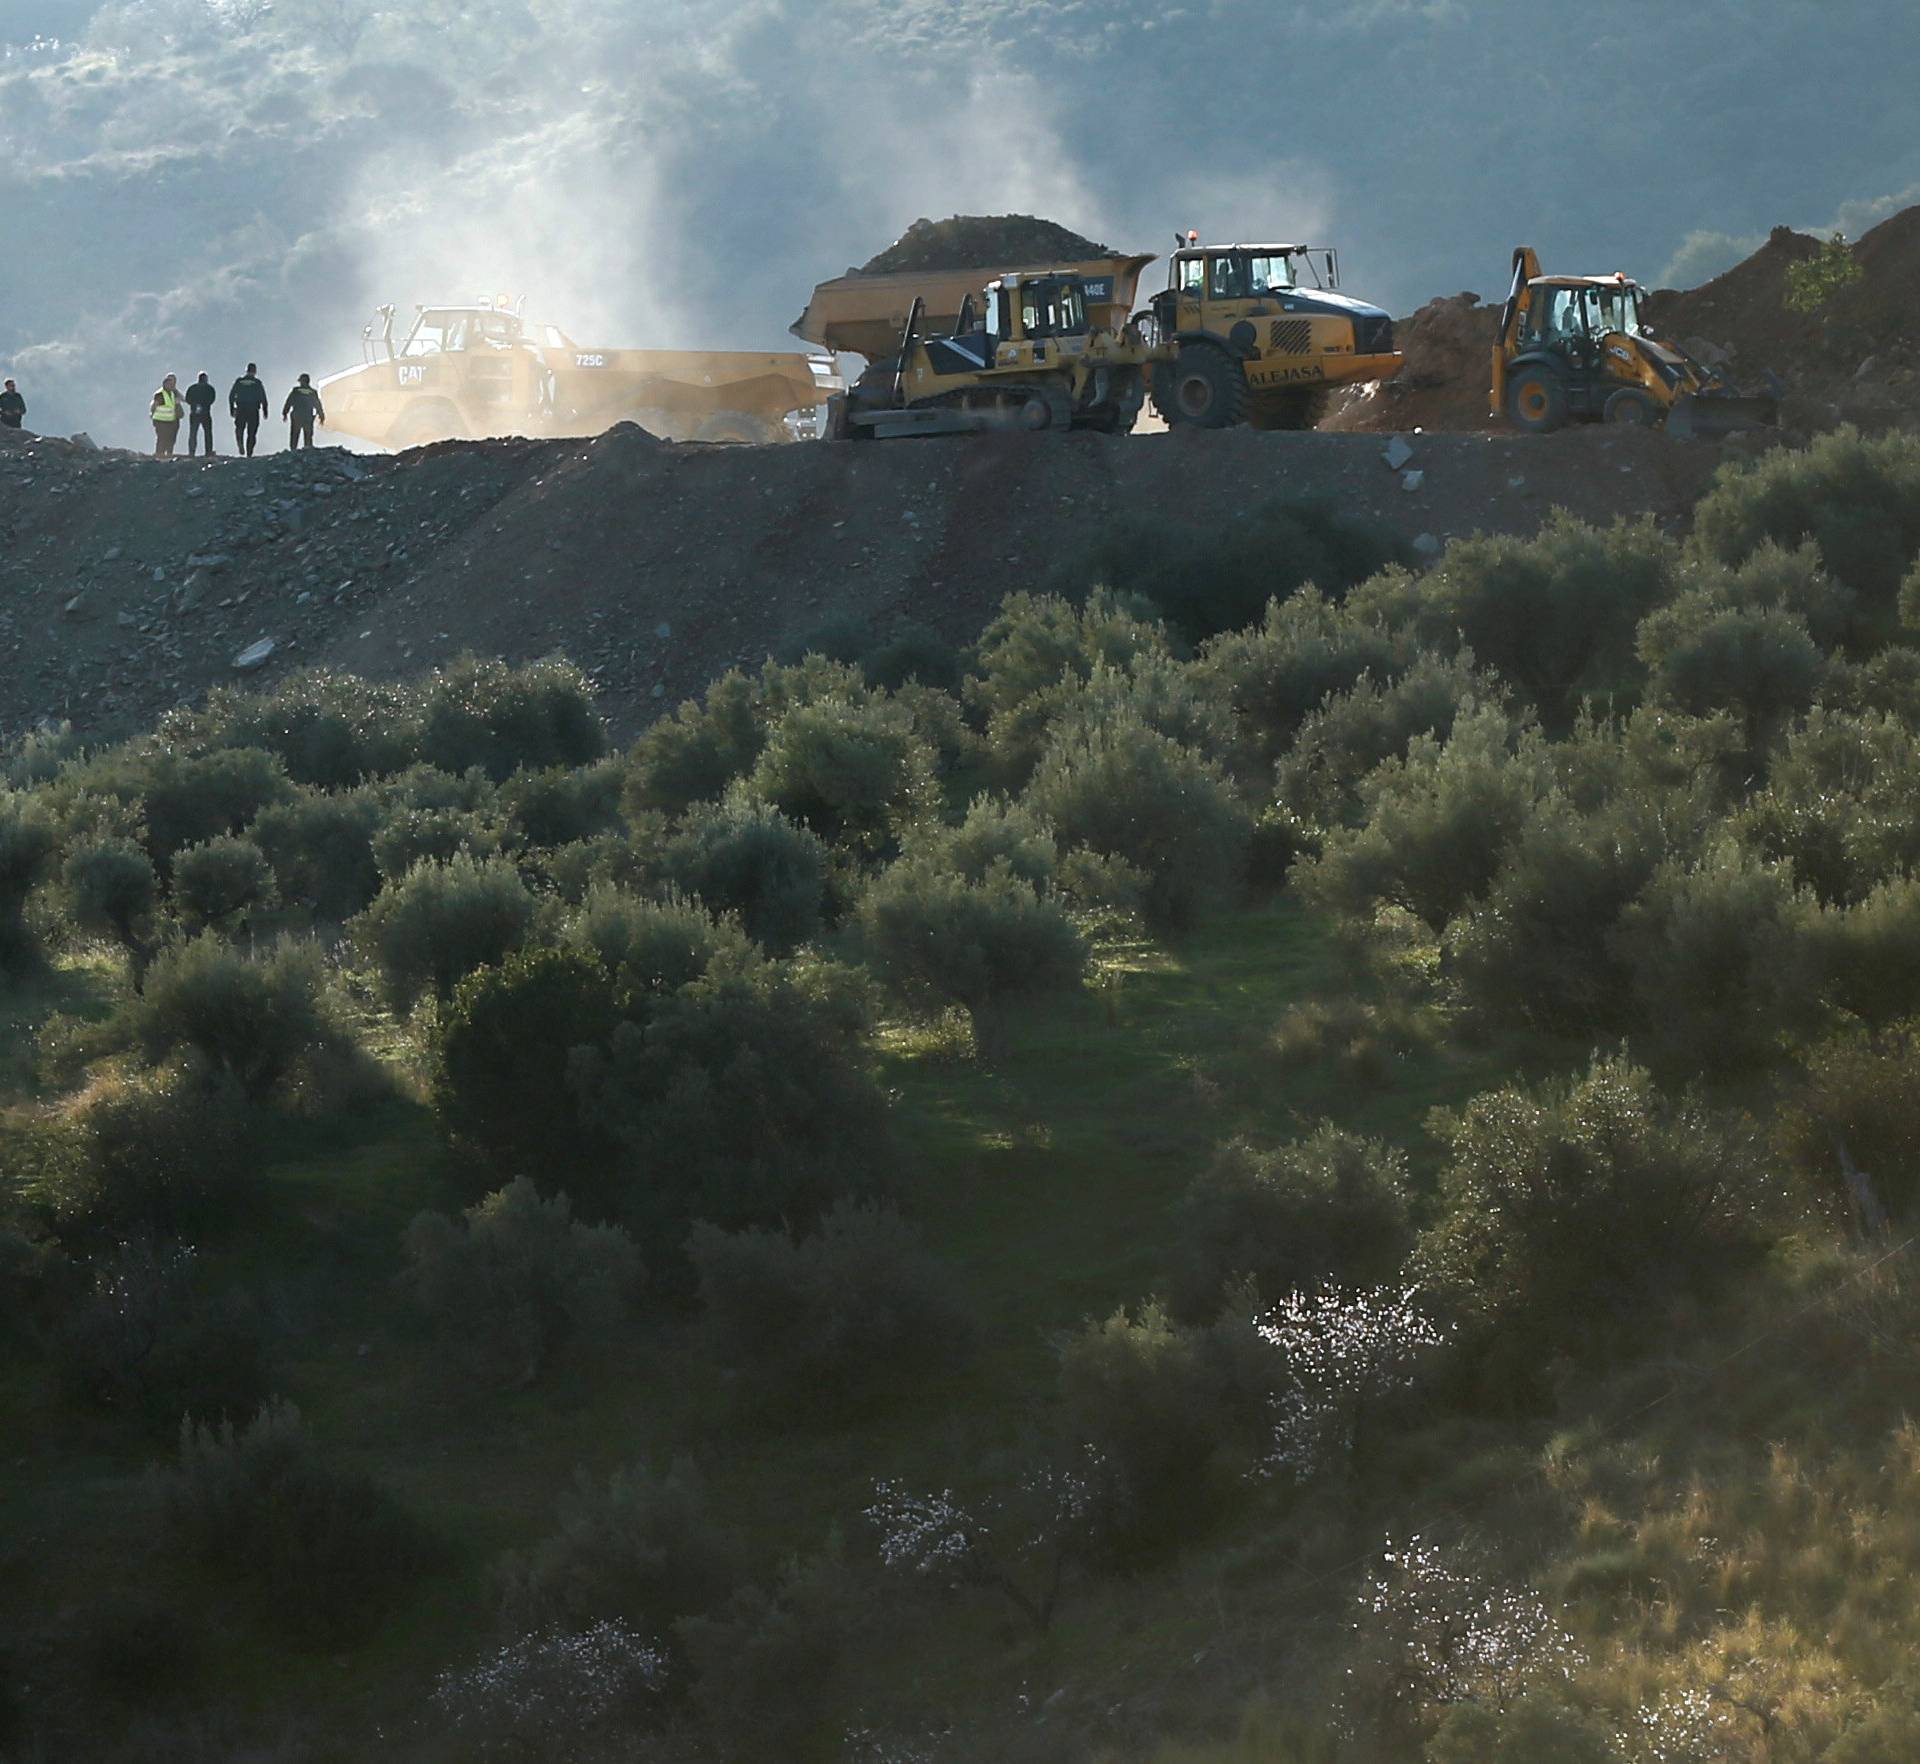 Rescuers stand next to diggers and trucks at the area where Julen, a Spanish two-year-old boy fell into a deep well four days ago when the family was taking a stroll through a private estate, in Totalan